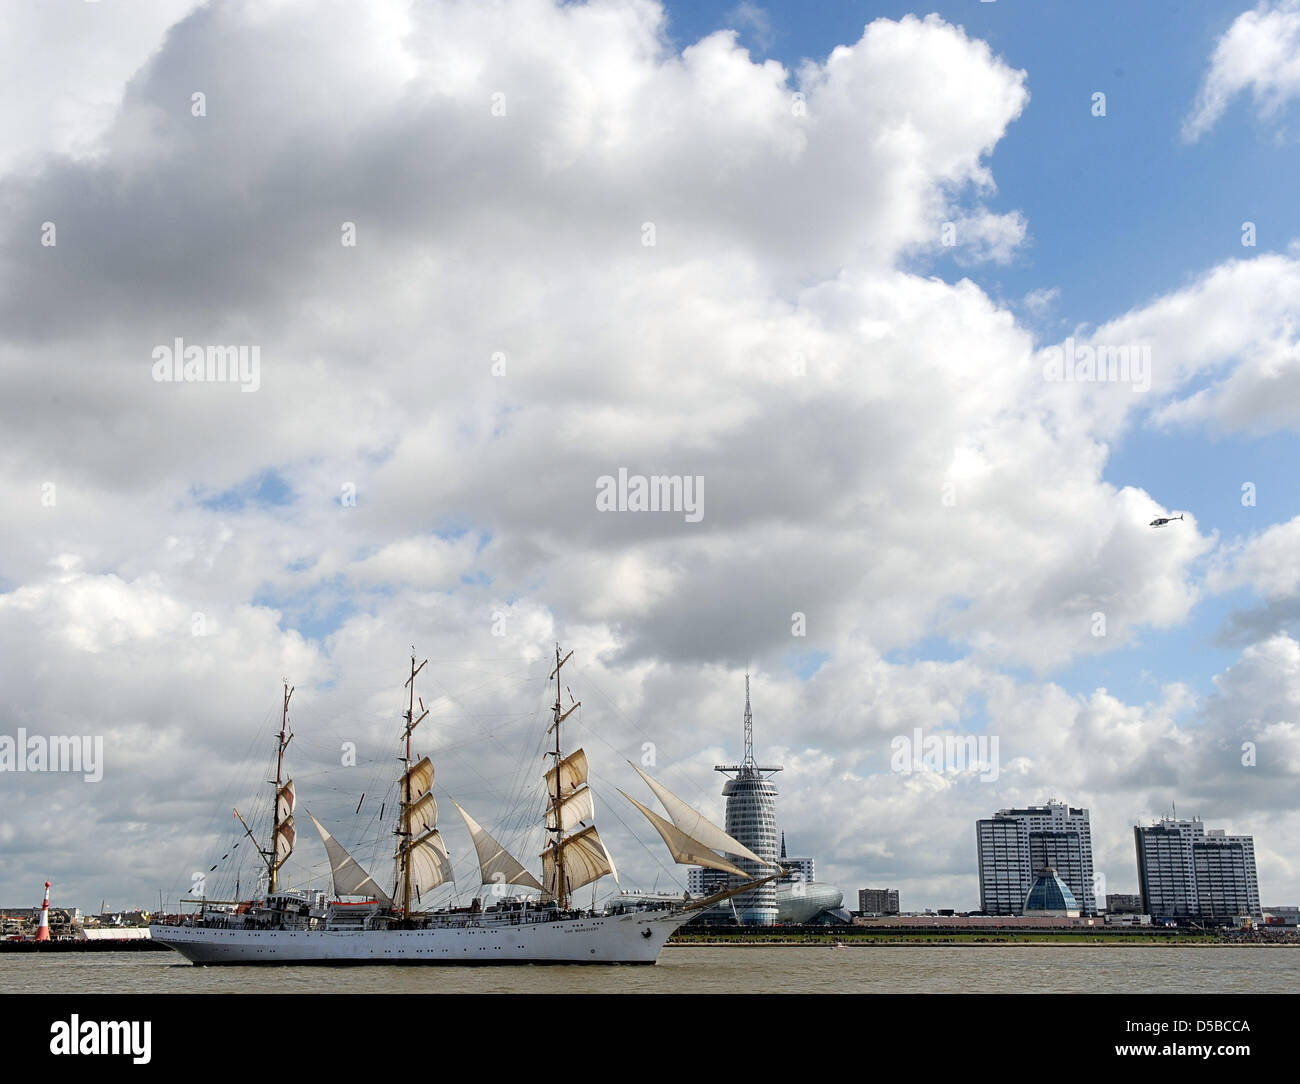 The Polish full-rigged ship 'Dar Mlodziezy' arrives for the parade during the Windjammer festival 'Sail 2010' in Bremerhaven, Germany, 25 August 2010. More than 200 ships from 15 nations participate in the maritime festival (25-29 August 2010). Around one million visitors are expected for the sailing encounter in Bremerhaven. Photo: Ingo Wagner Stock Photo